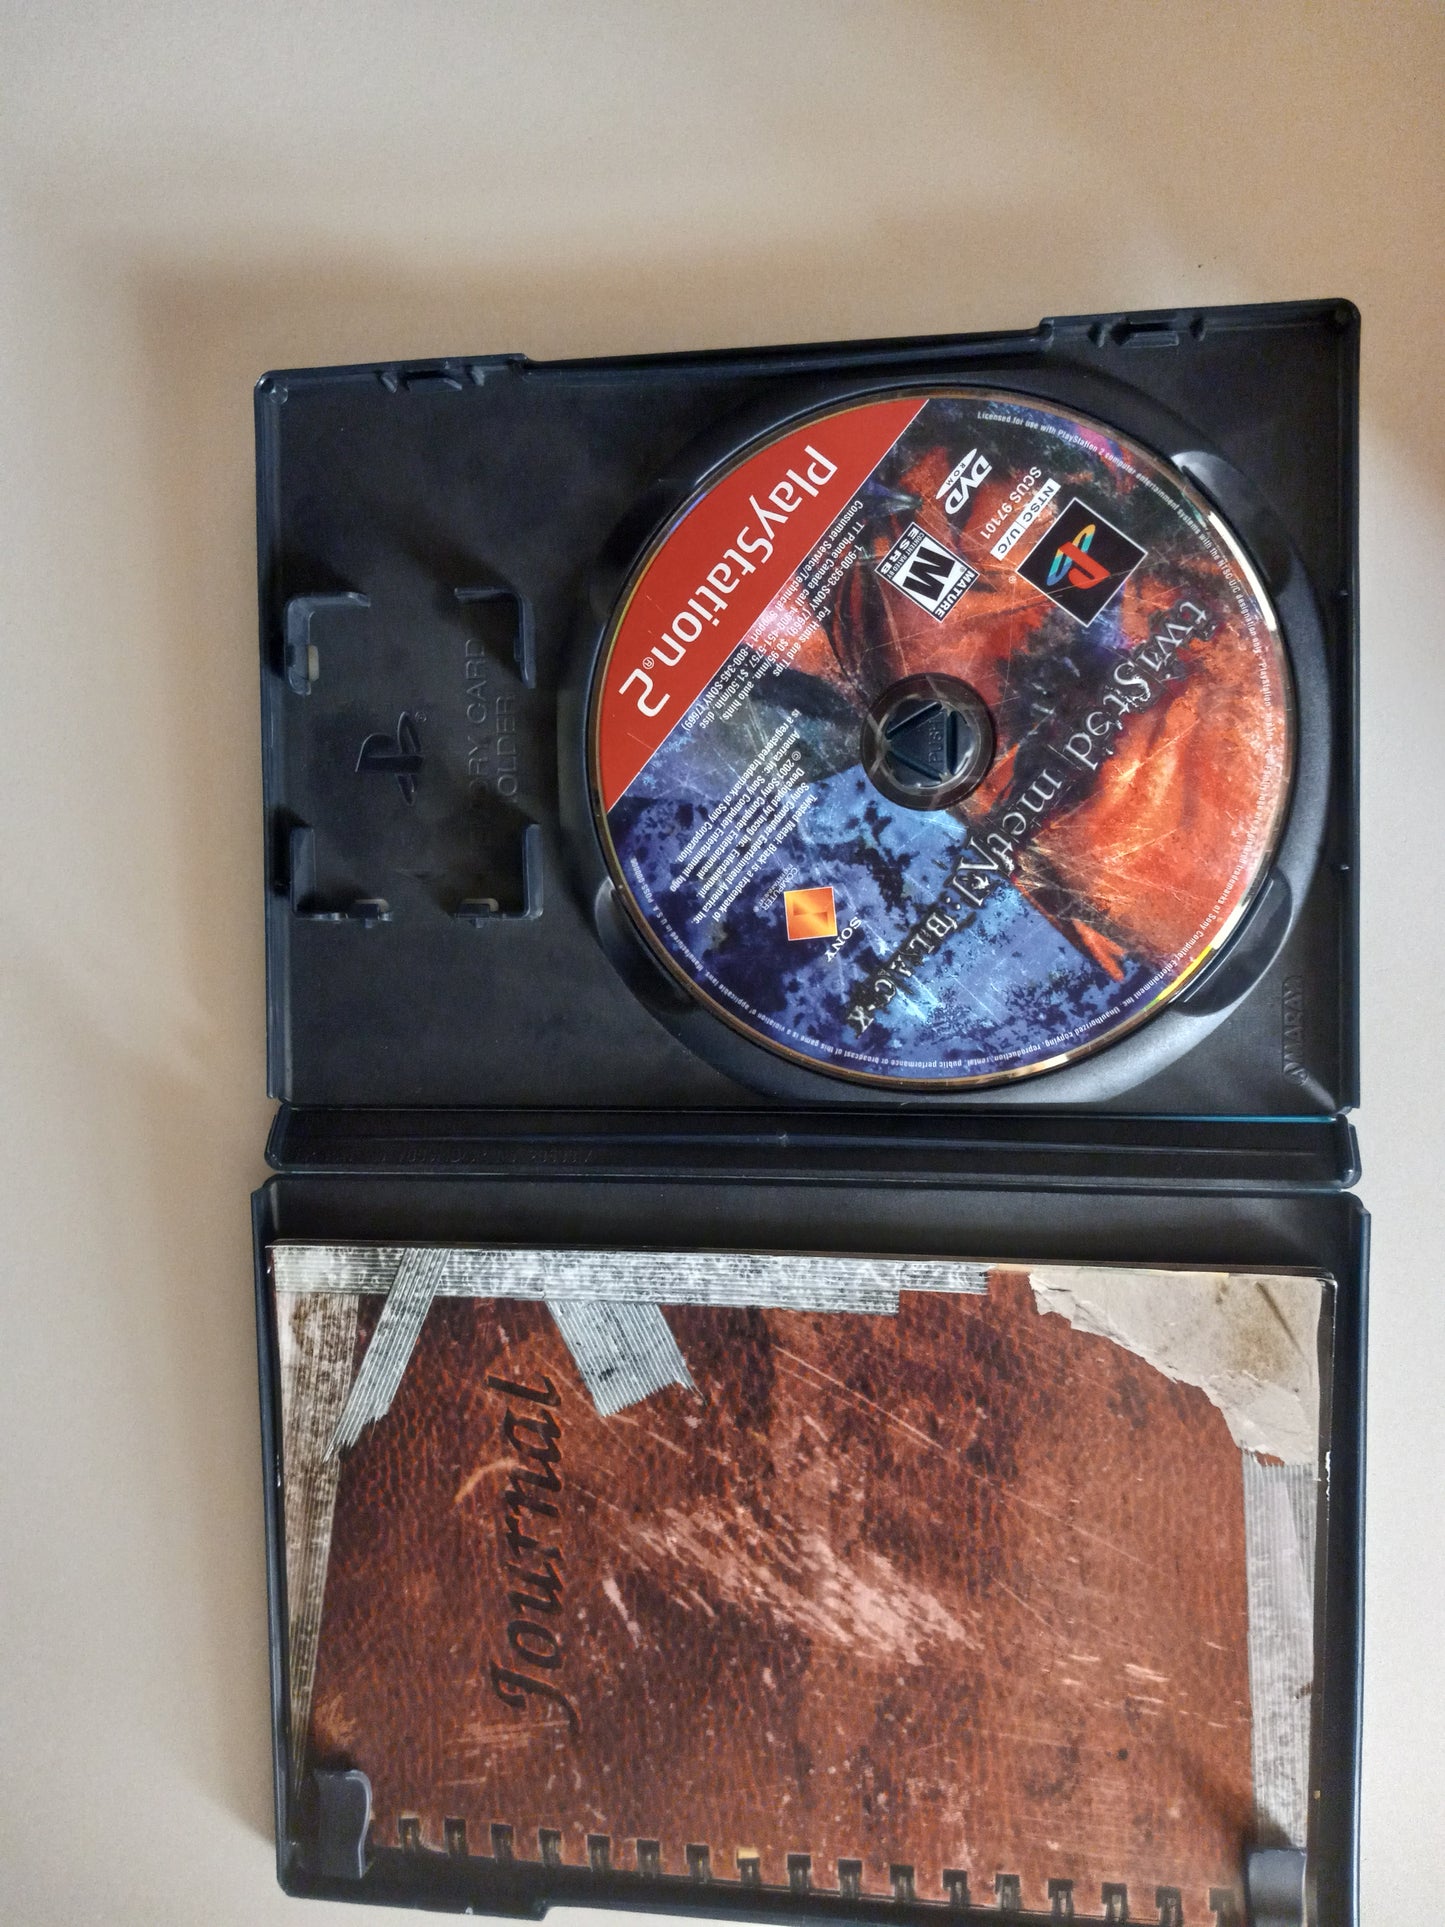 Twisted Metal Black scratched some PS2